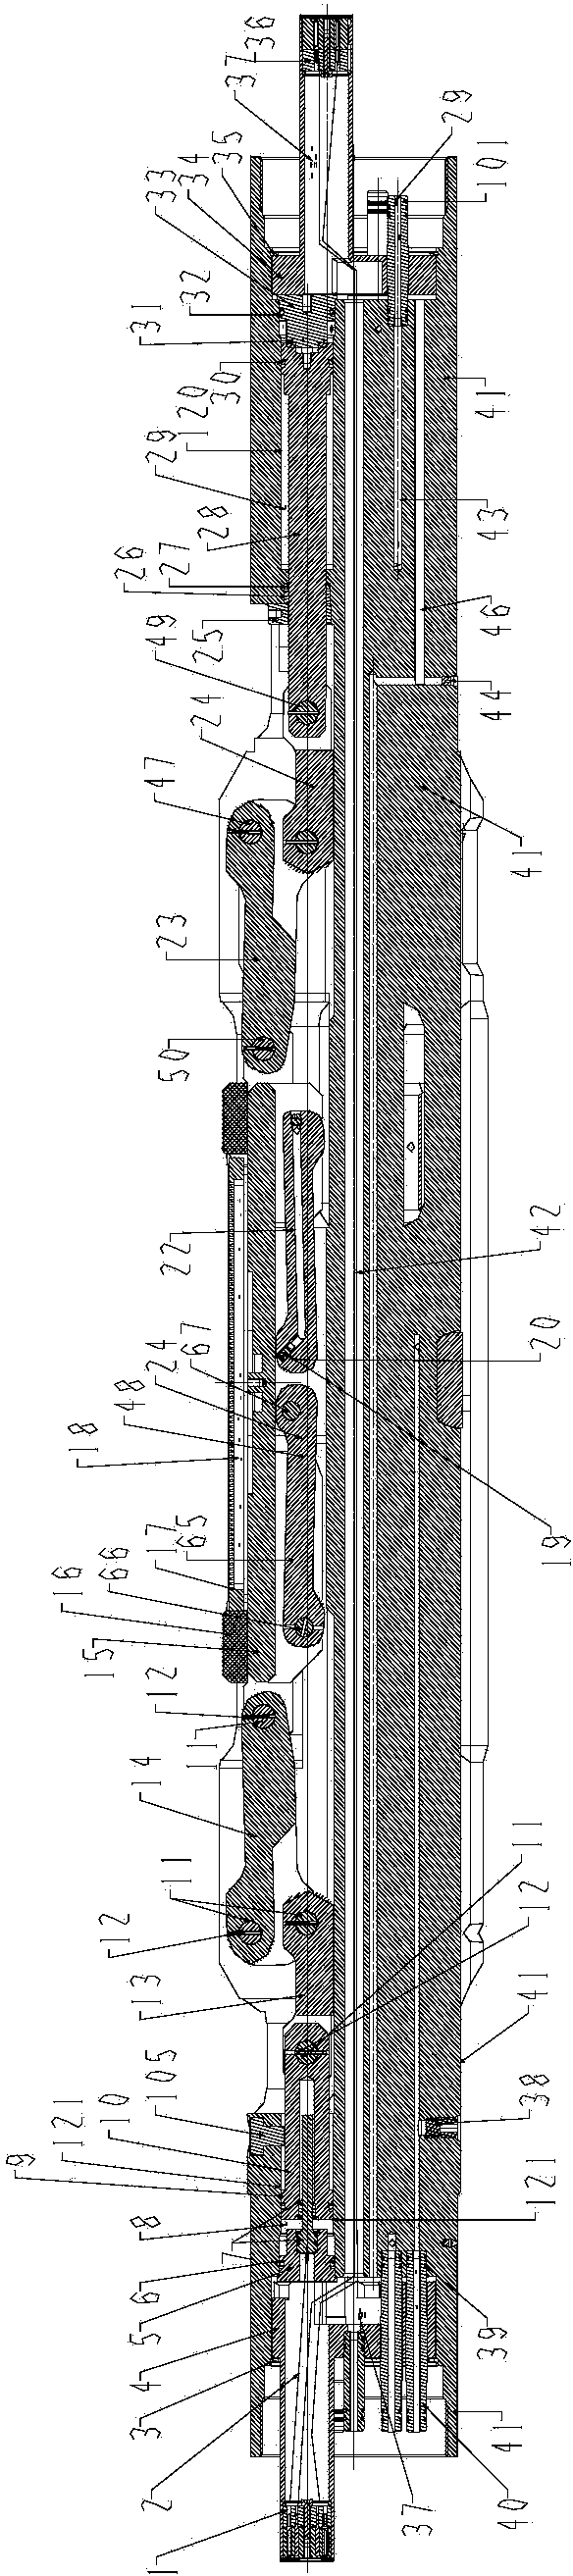 Pushing and setting device